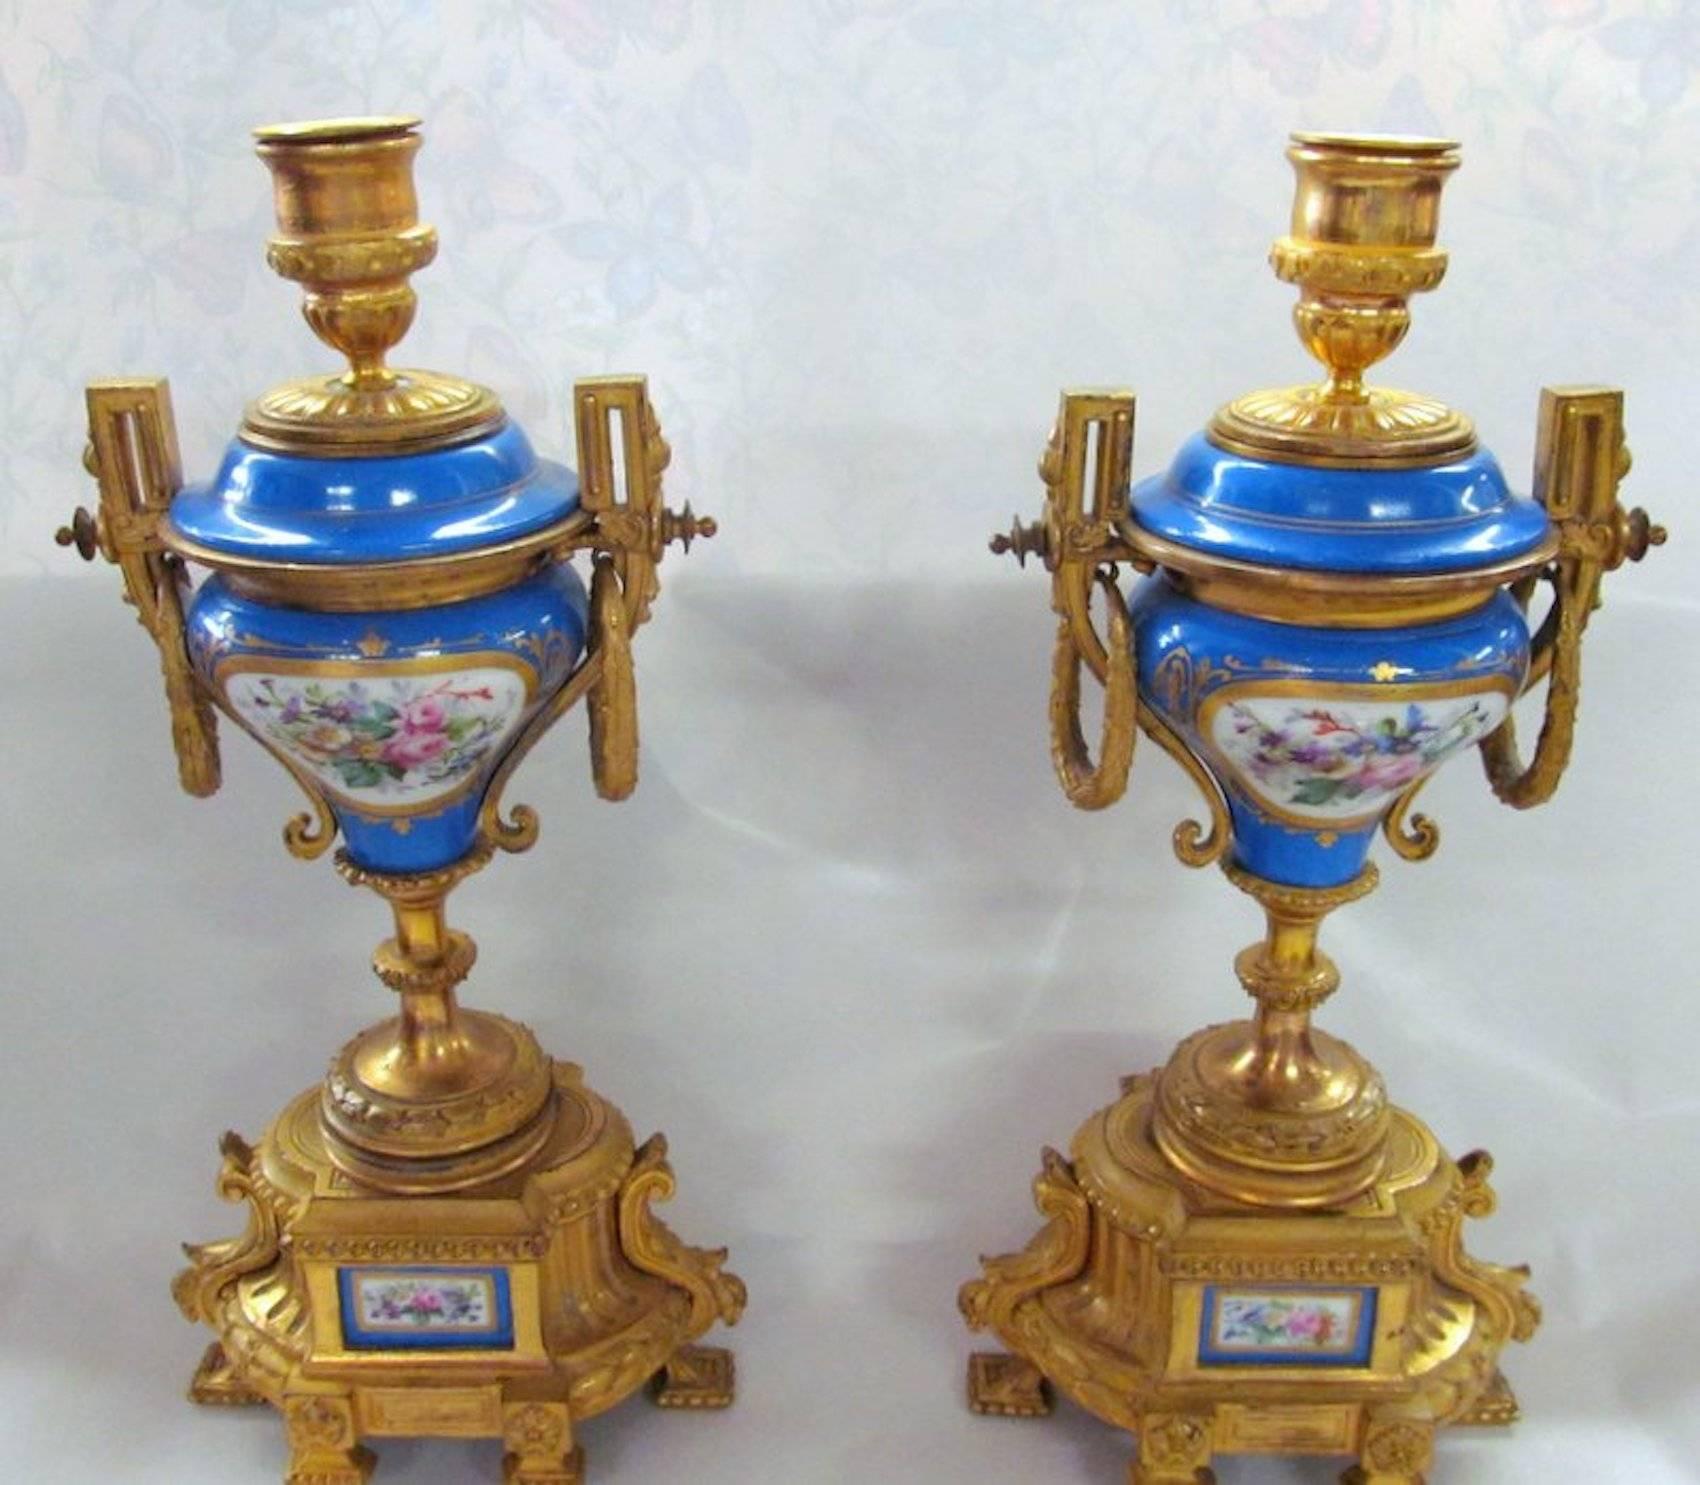 Louis Philippe Pair of Antique French Sèvres-style Porcelain and Ormolu Mounted Cassolettes